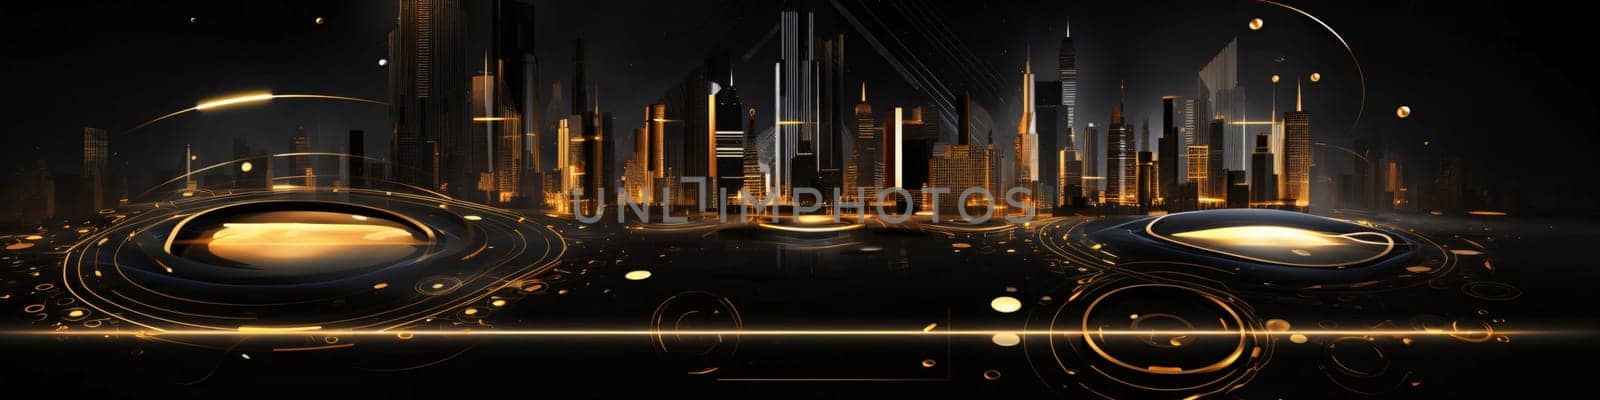 Digital illustration of city in abstract background. Futuristic city concept. by ThemesS